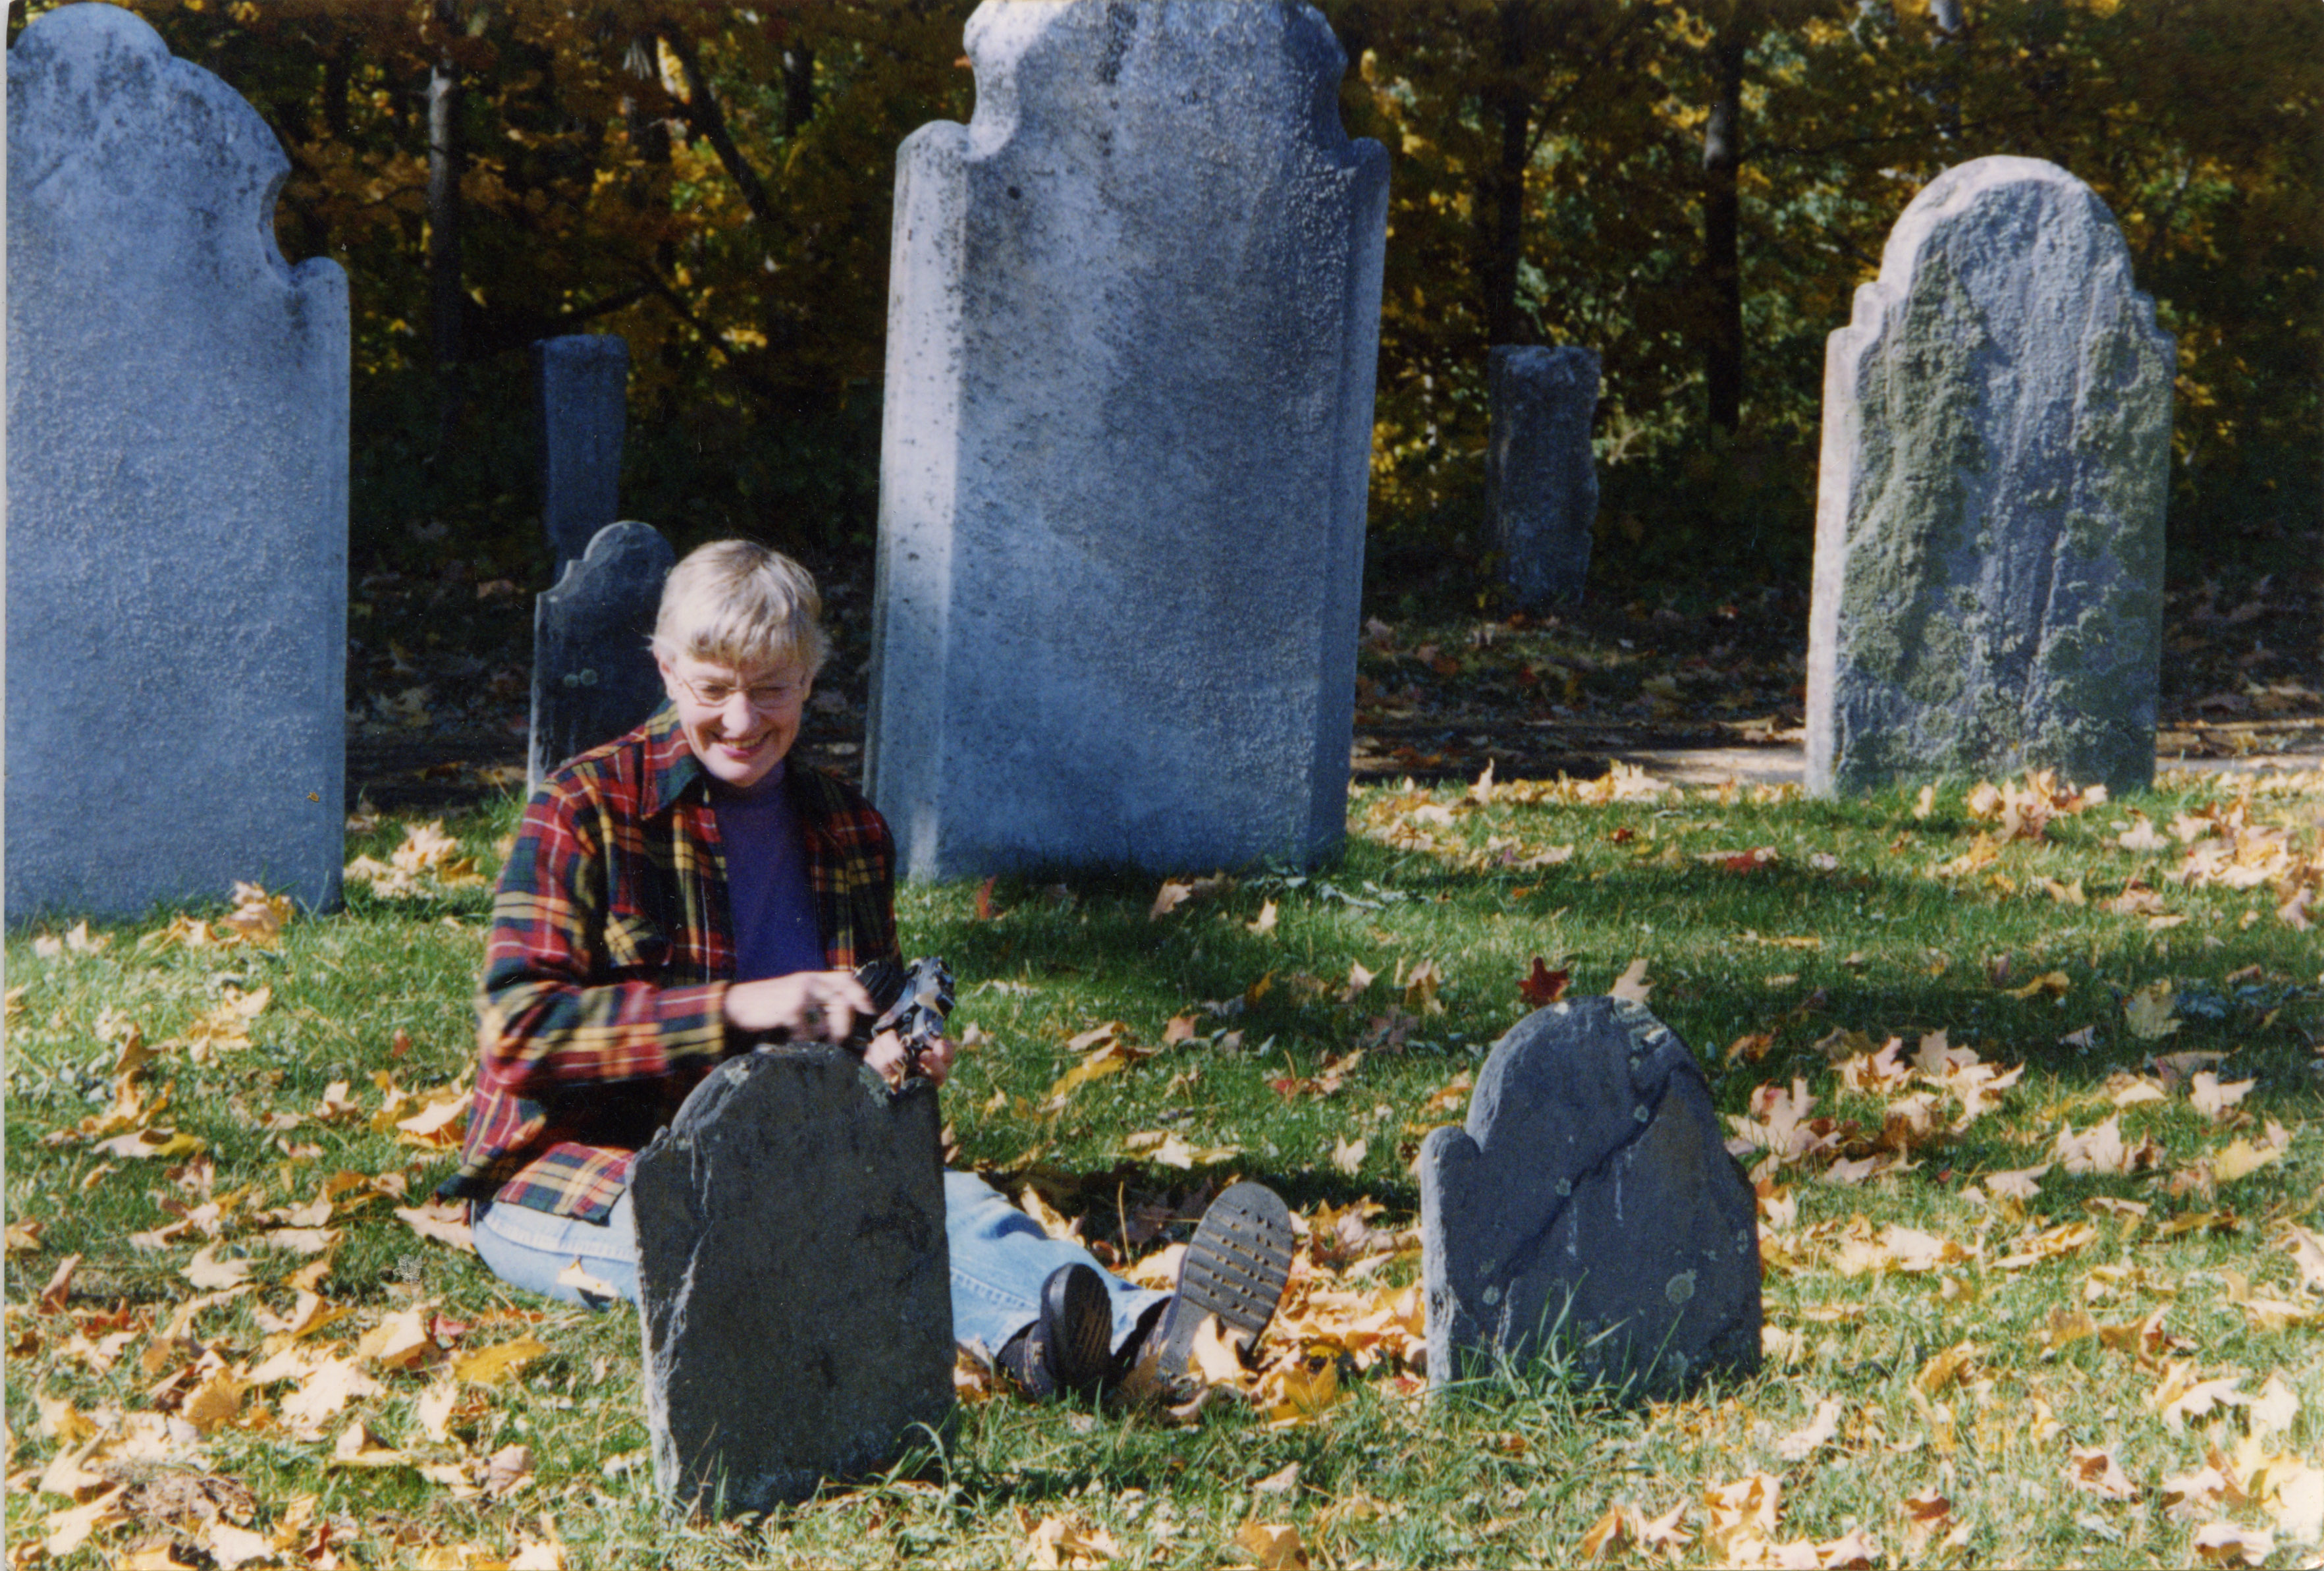 
An image of: Marie Ferre among the headstones, ca.2004